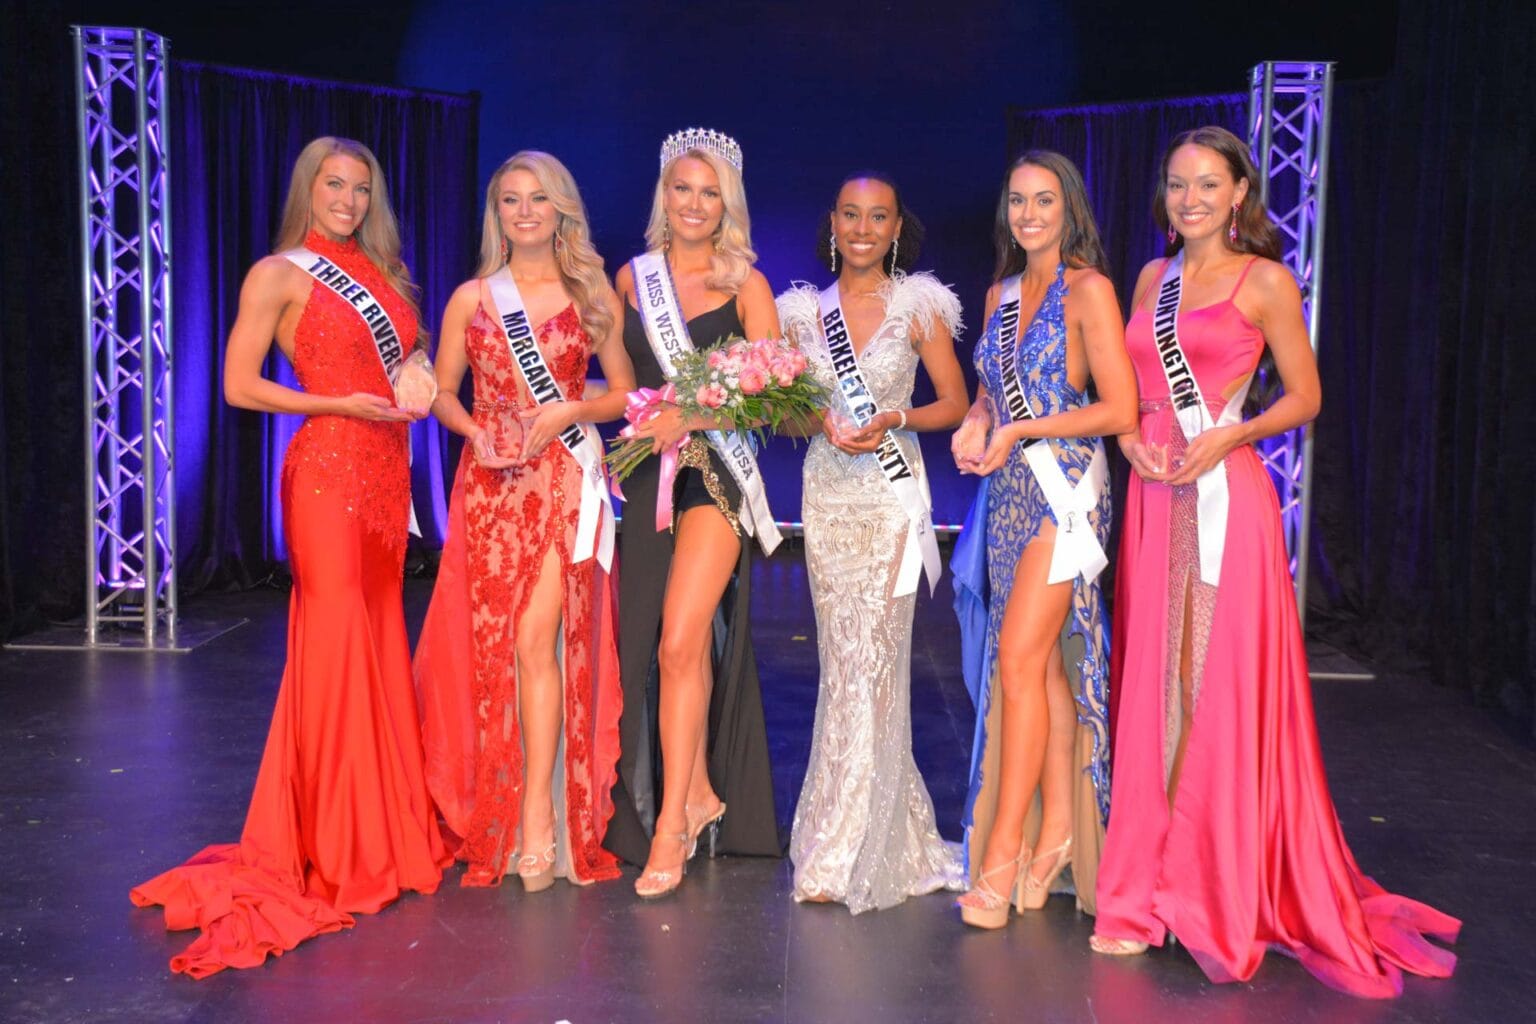 Parkersburg native named Miss West Virginia USA in Buckhannon over the